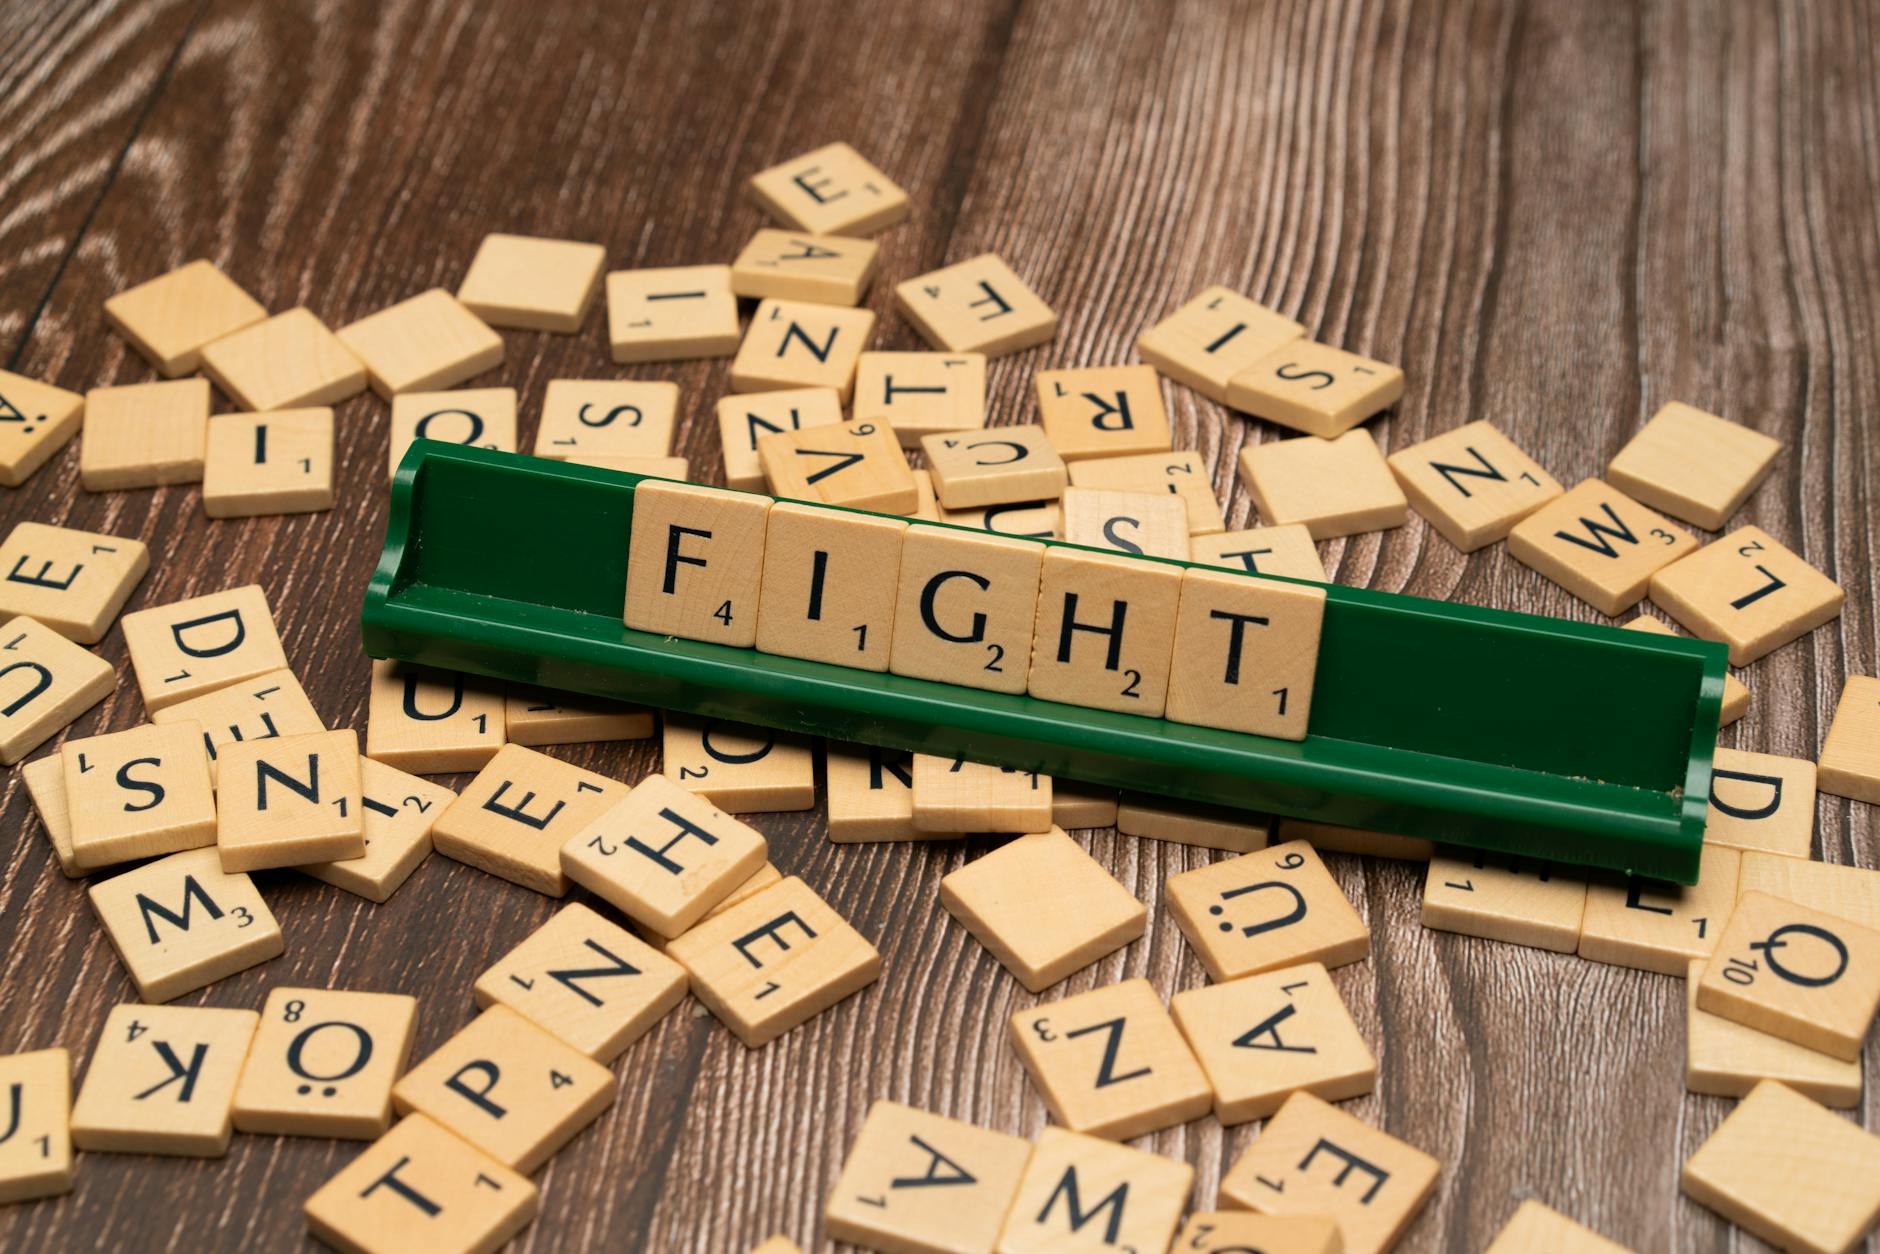 The word fight is spelled out in scrabble tiles